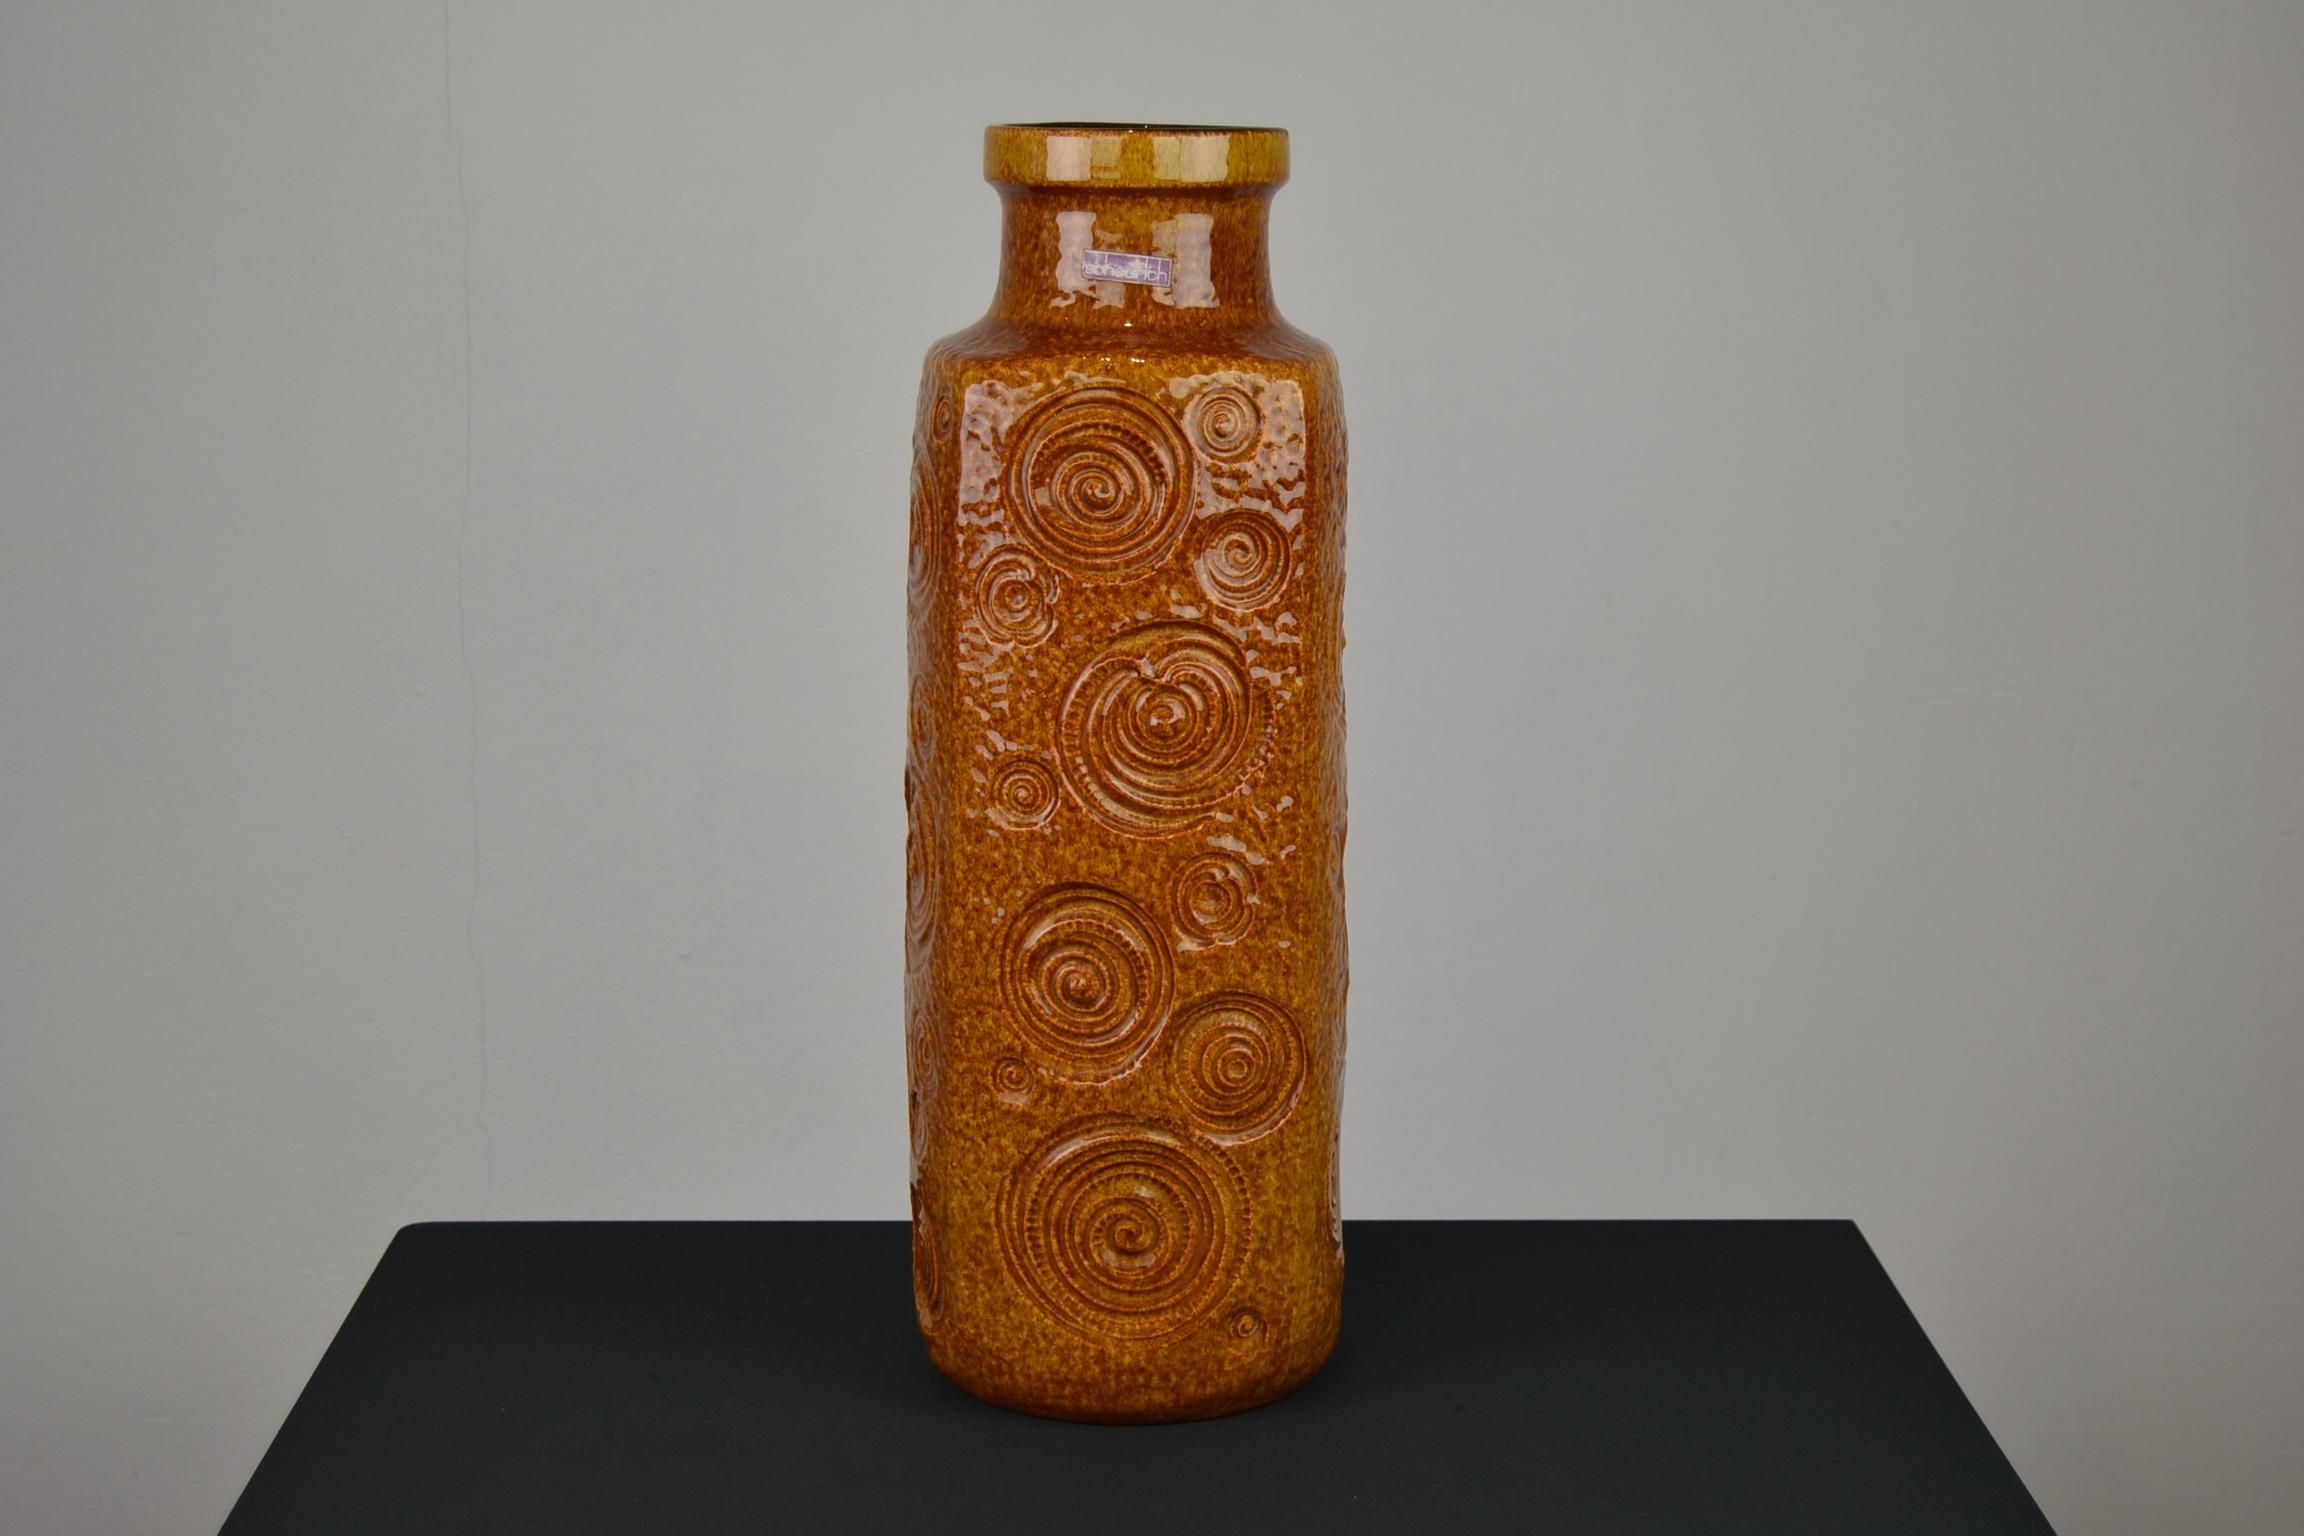 Caramel brown floor vase by Scheurich, Western Germany.
This 1970s fat lava art pottery vase is marked 282-53, Western Germany. 

A beautiful vase with beautiful design, circles all around on the vase.
If you would see white spots on the